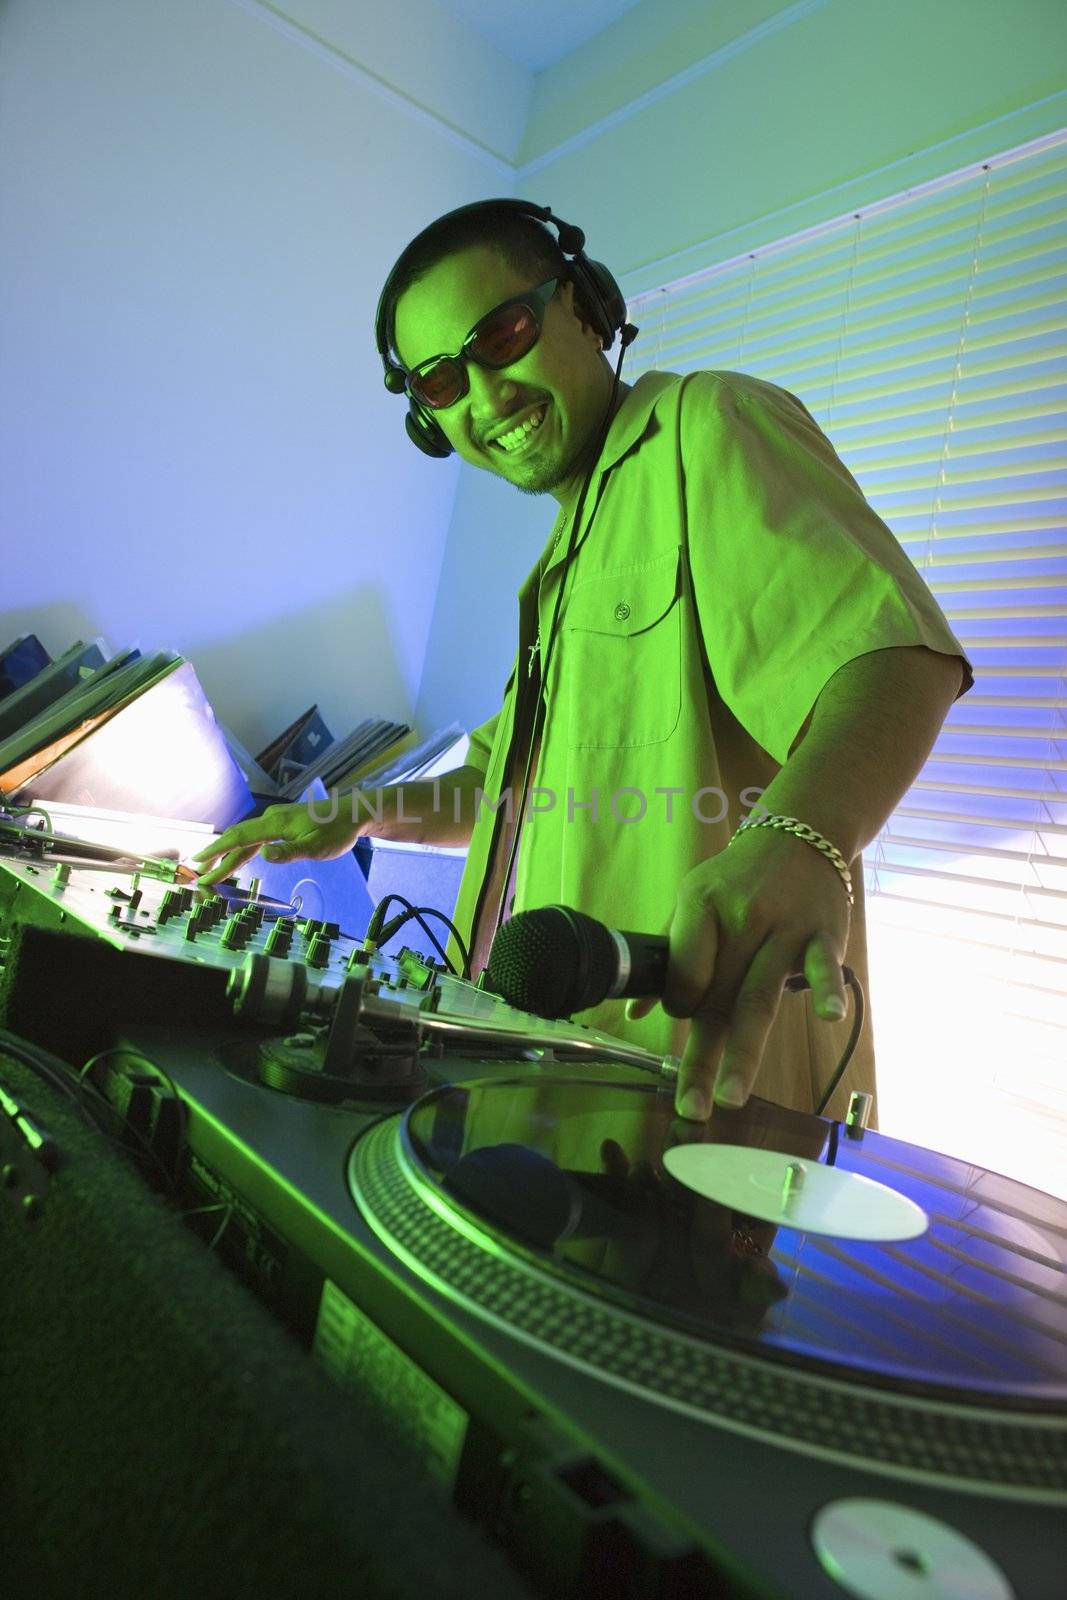 Asian young adult male DJ wearing sunglasses behind mixing equipment with hand on record turntable looking at viewer smiling.